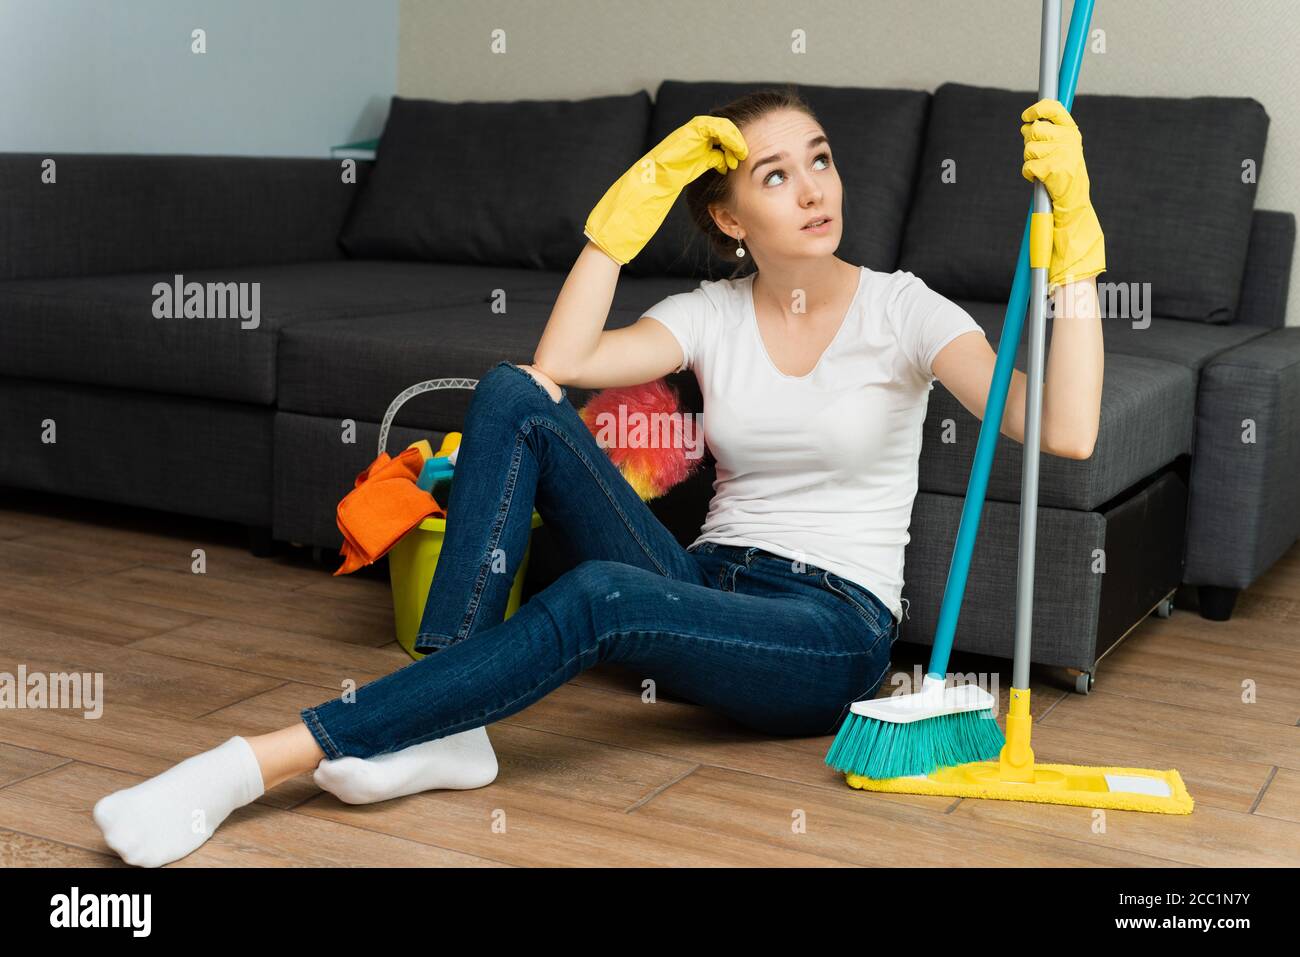 A beautiful woman in rubber gloves next to a coat and cleaning products gets angry at a lot of household chores. Problems of distribution of household duties. Stock Photo